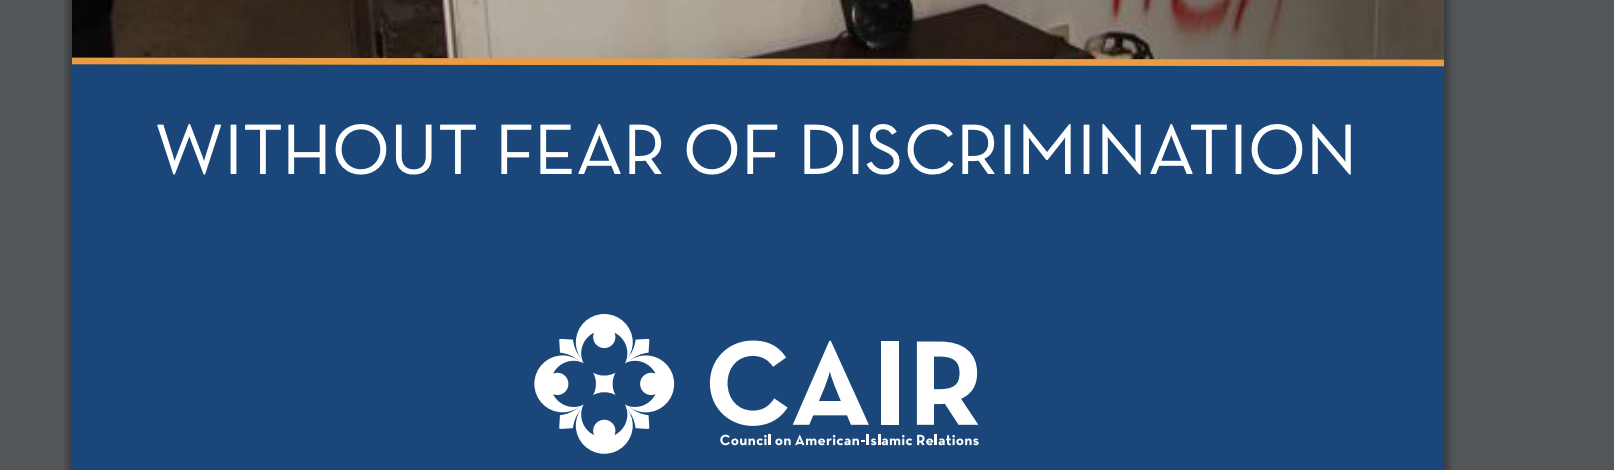 2008 Civil Rights Report: Without Fear of Discrimination